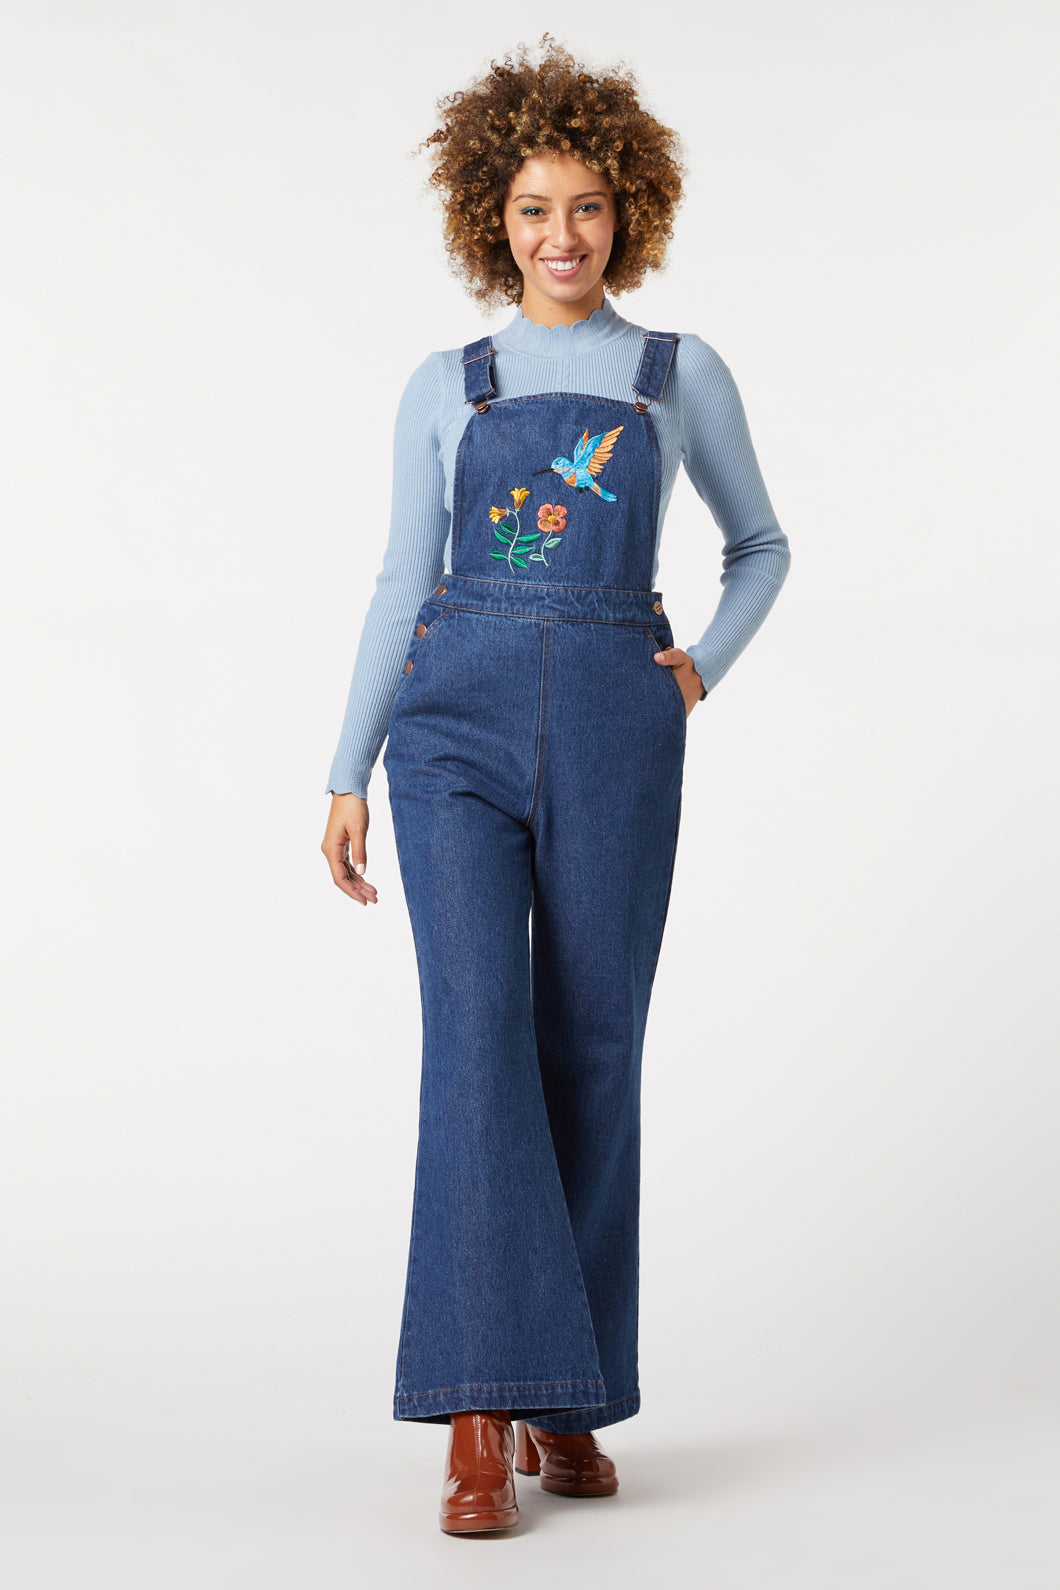 Sweet Nectar Embroidered Overall – Dangerfield